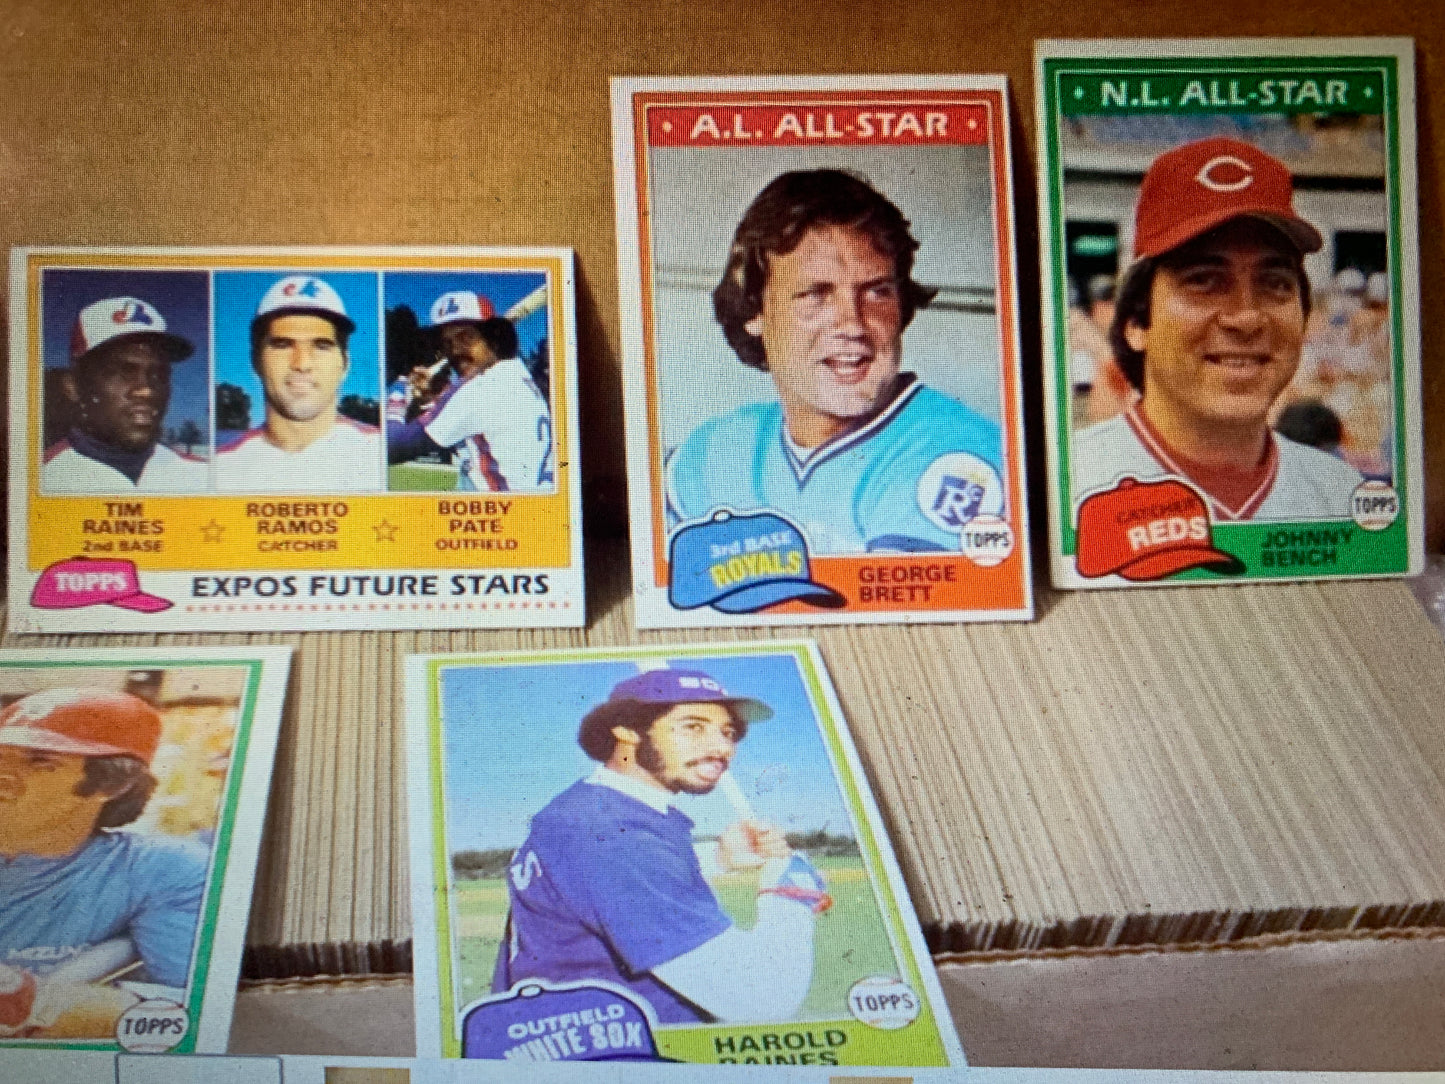 1981 Topps Baseball complete set (1-726) Hand Collated exc condition Harold Baines, Tim Raines, Gibson, And Fernando Rookie Cards